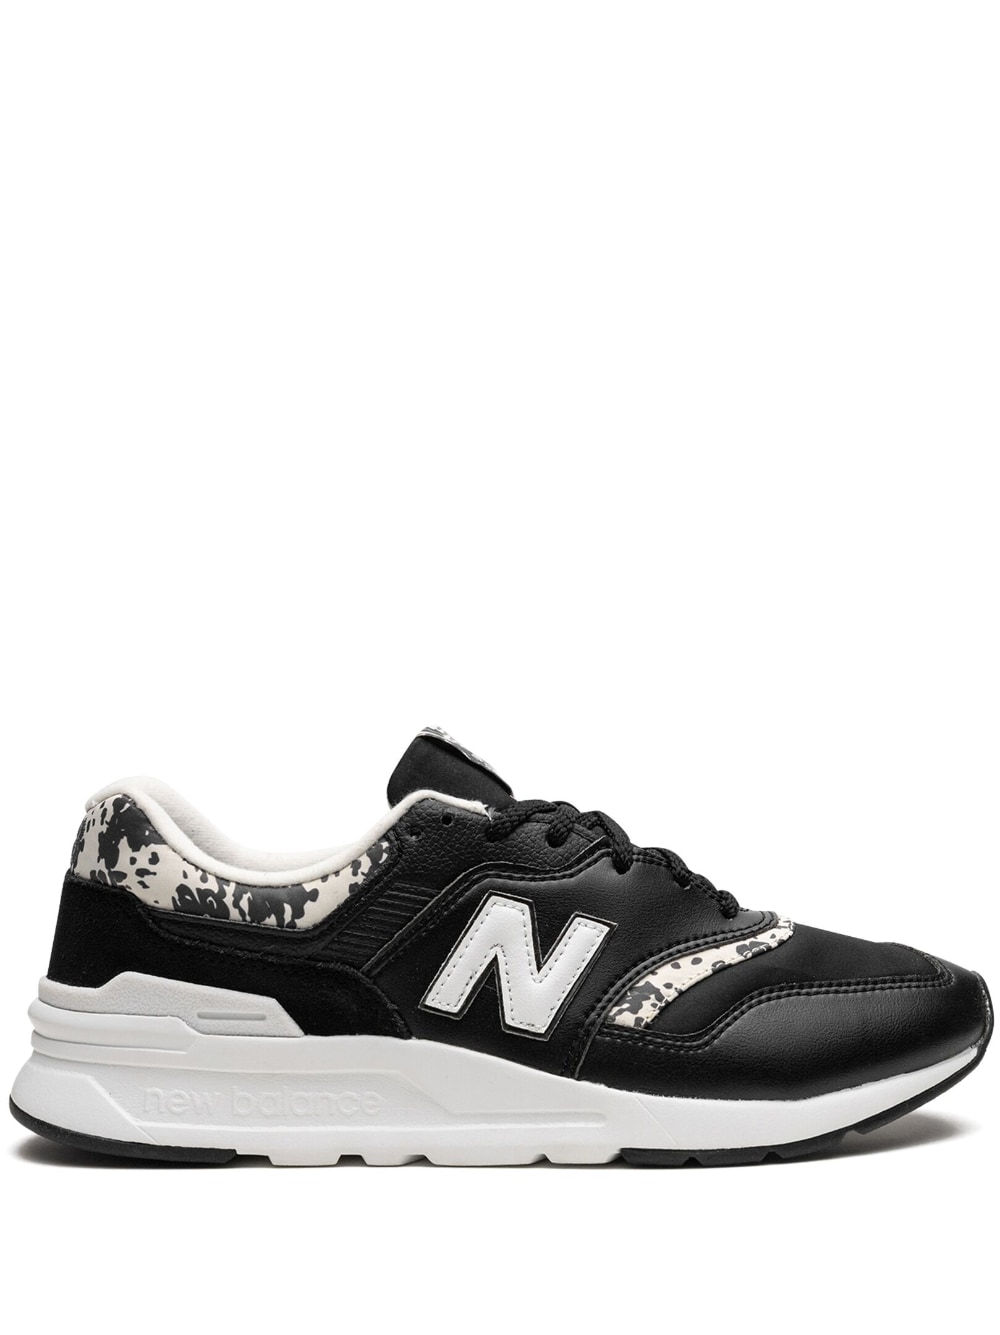 New Balance 997H low-top sneakers - Black